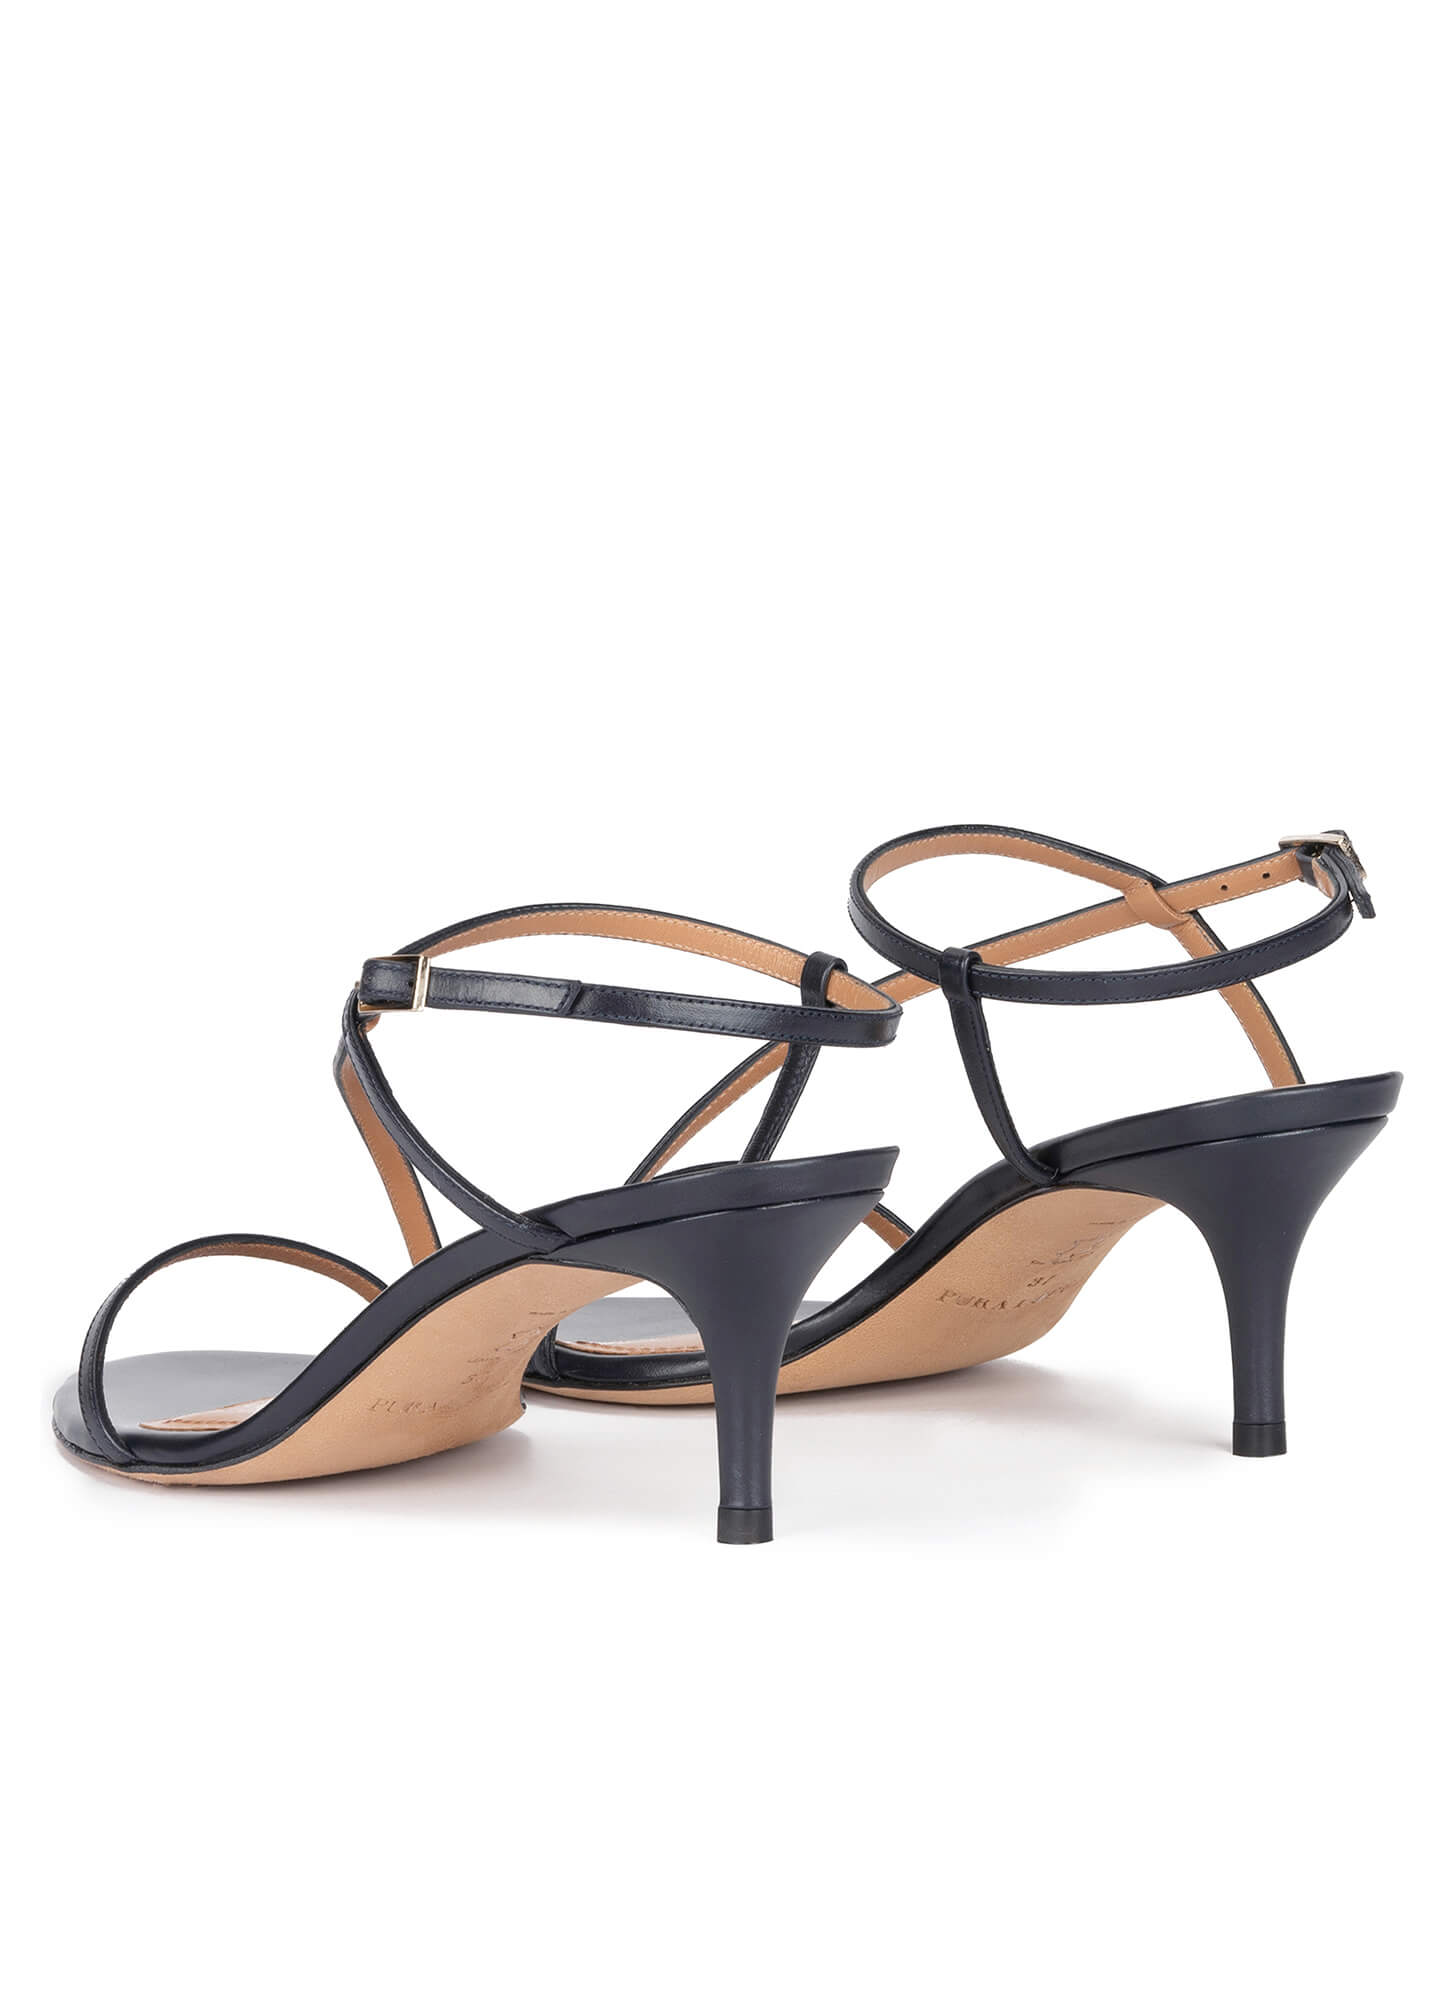 Strappy mid heel sandals in navy blue leather . PURA LOPEZ